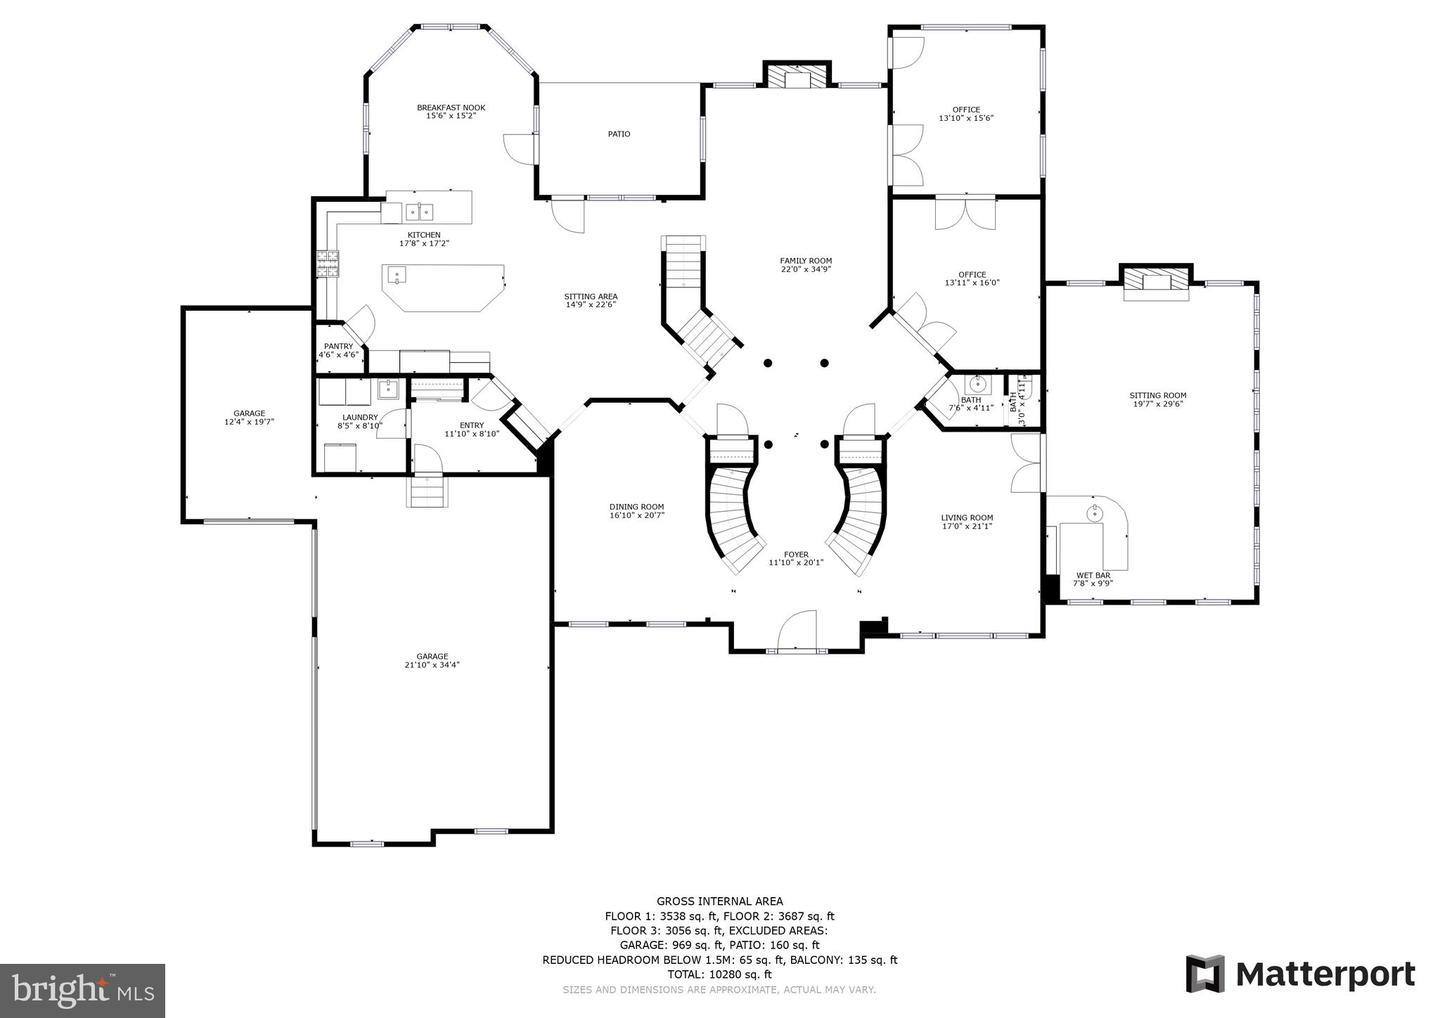 basic 2D floor plans used by most media companies for properties. No details, boring, just walls windows and doors.